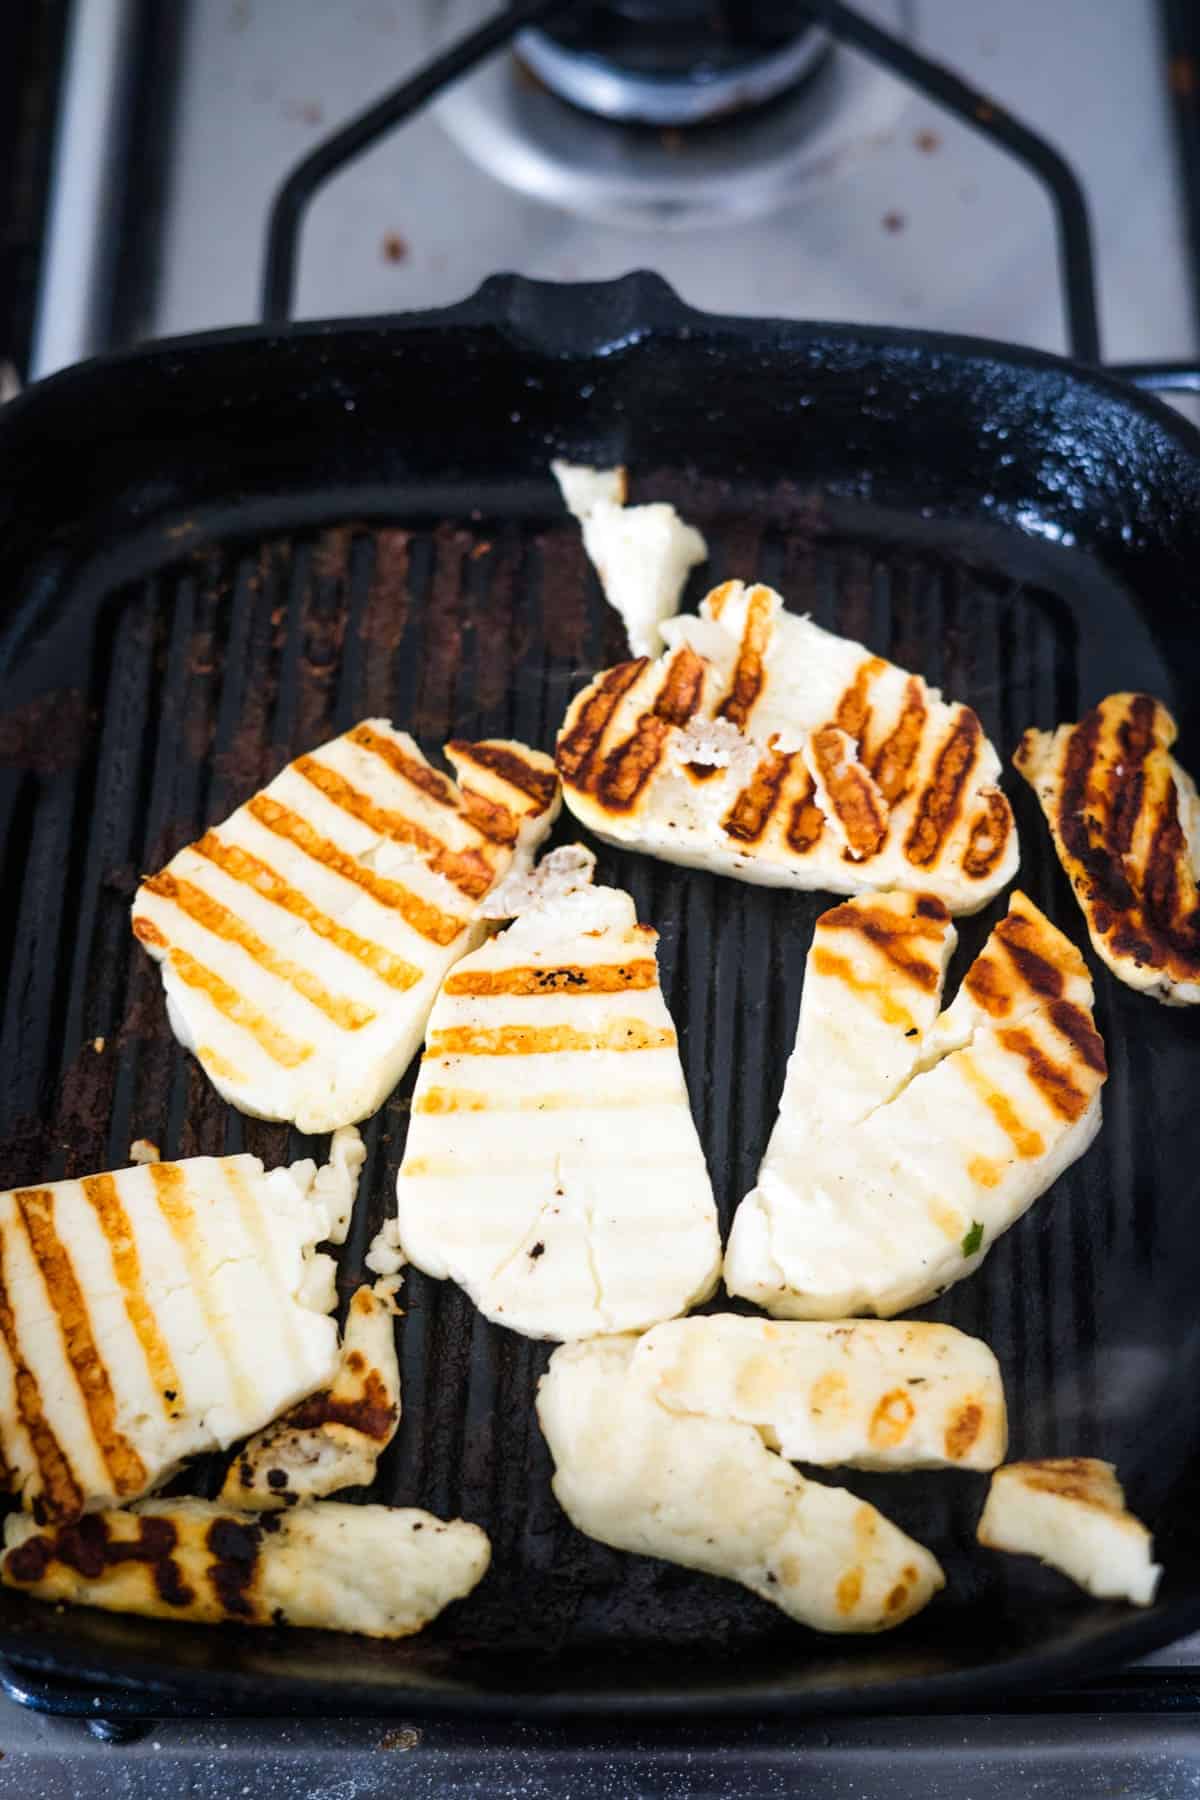 Grilled tofu in a avocado frying pan.